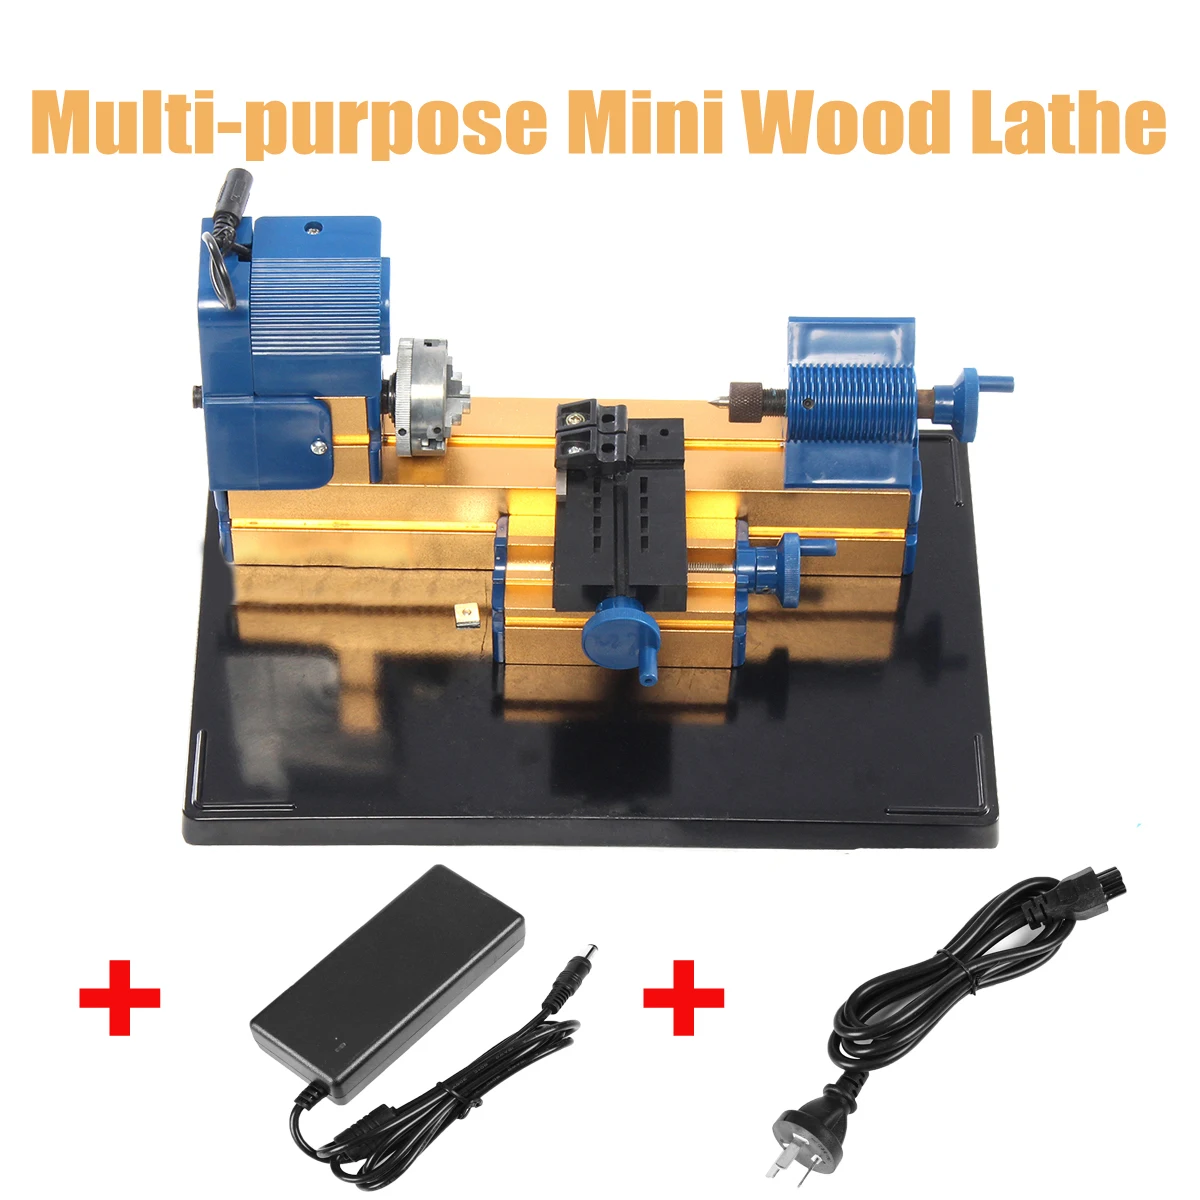 

Mini Multifunction Wood Lathe Motorized Jig-saw Bead Grinder Driller 24W DC 12V 2A Woodworking Turning Cutting Bead Tool